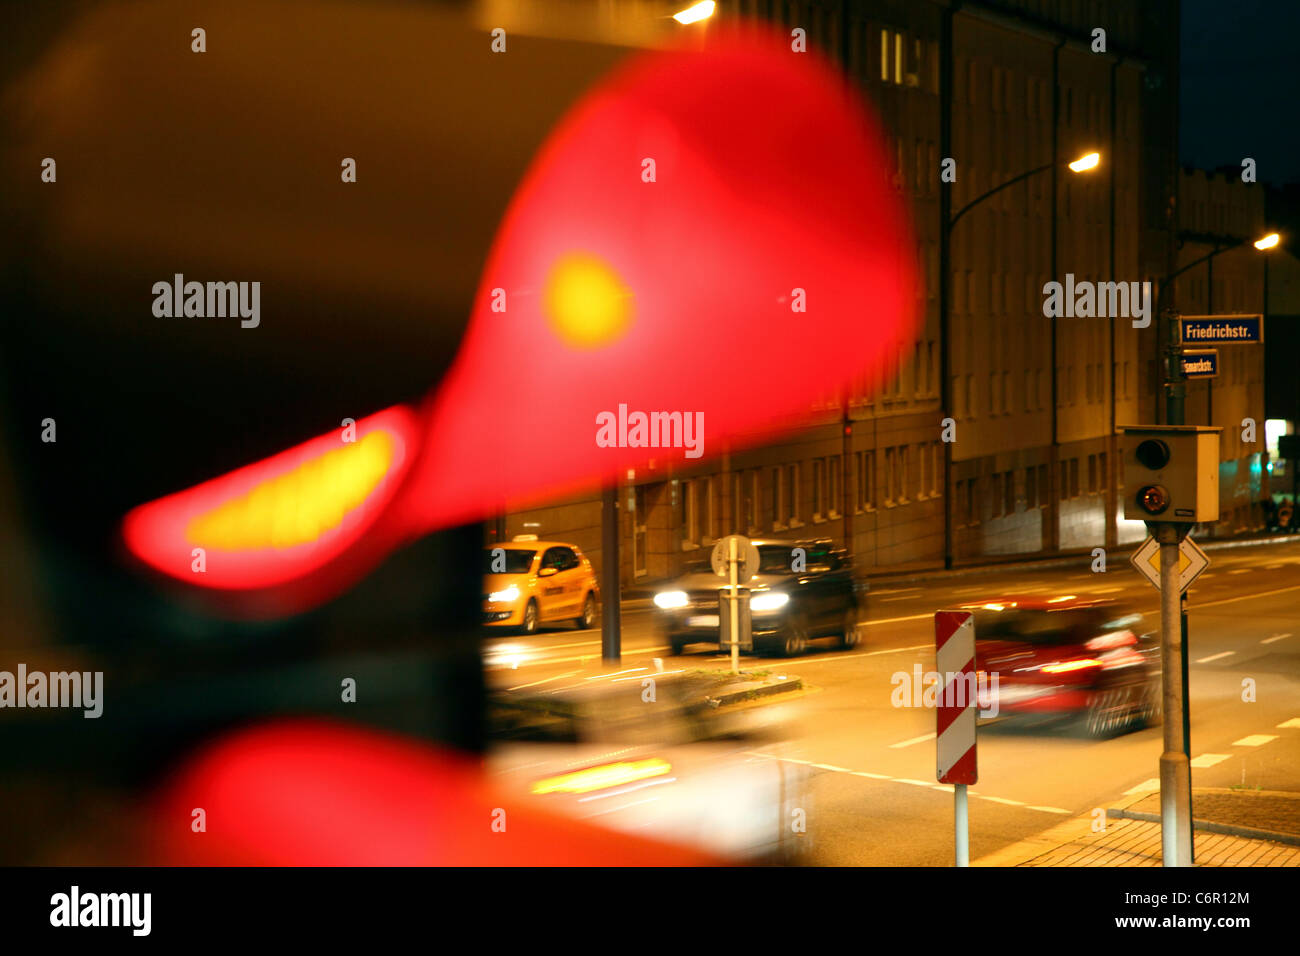 Traffic camera, at a traffic light, inner city street crossing, controls cars driving over red light signal. Stock Photo